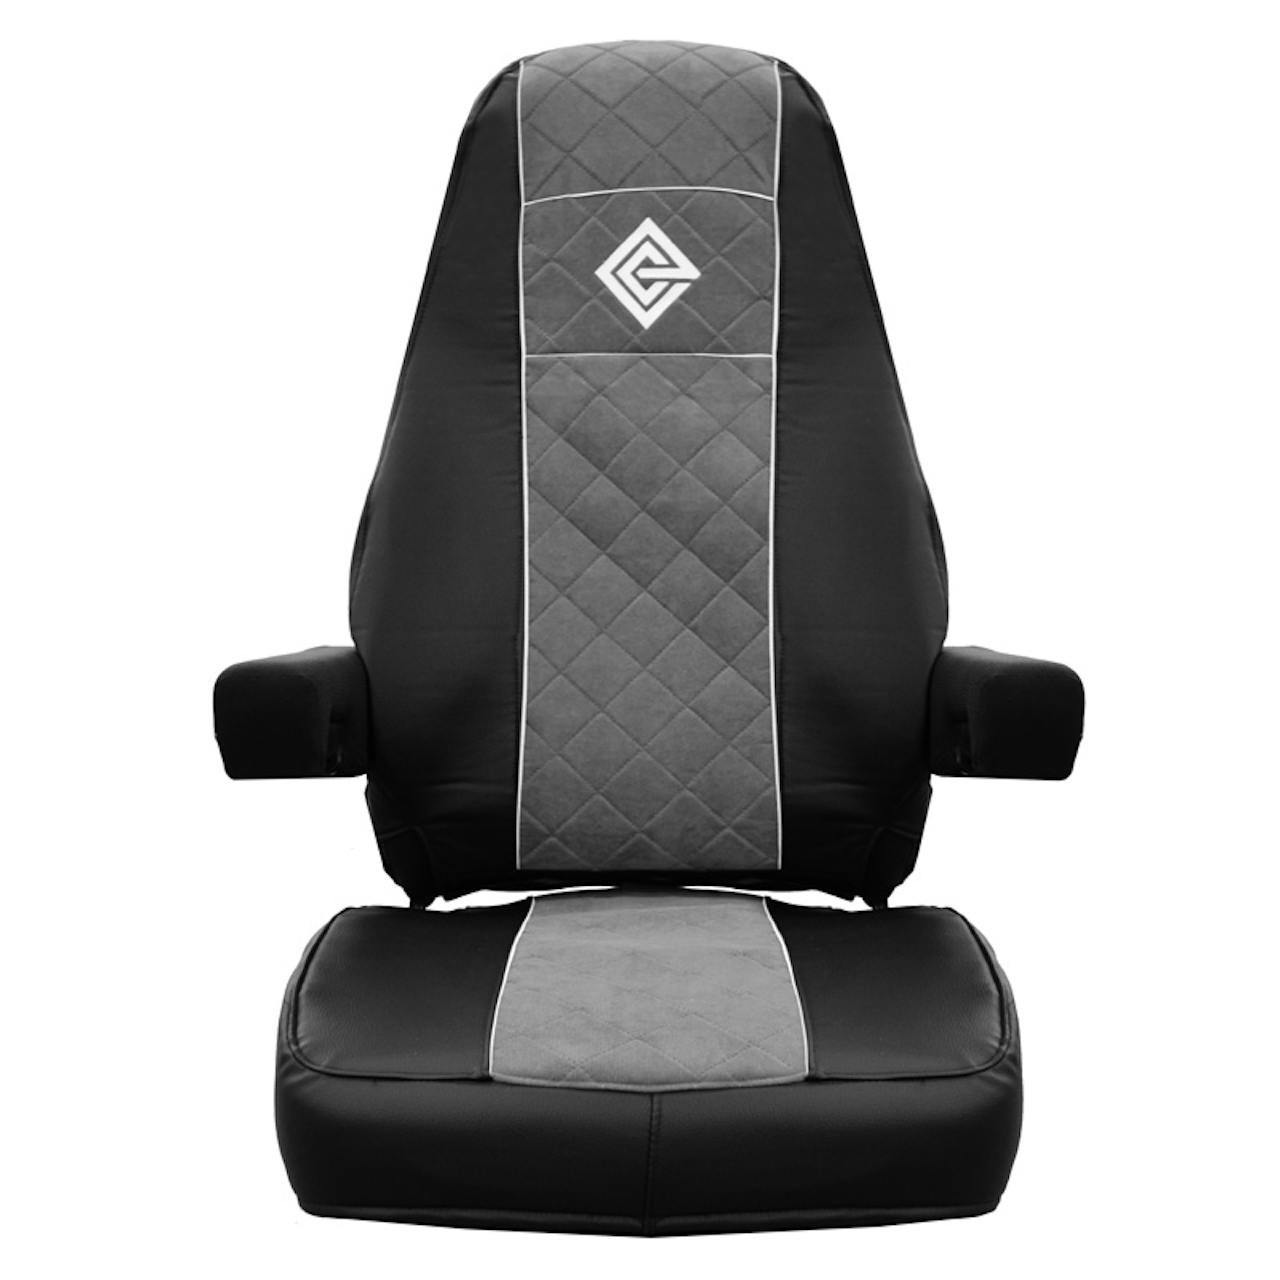 https://raneys-cdn11.imgix.net/images/stencil/original/products/197034/121481/gray-and-black-seat-cover__66941.1524183471.jpg?auto=compress,format&w=1280